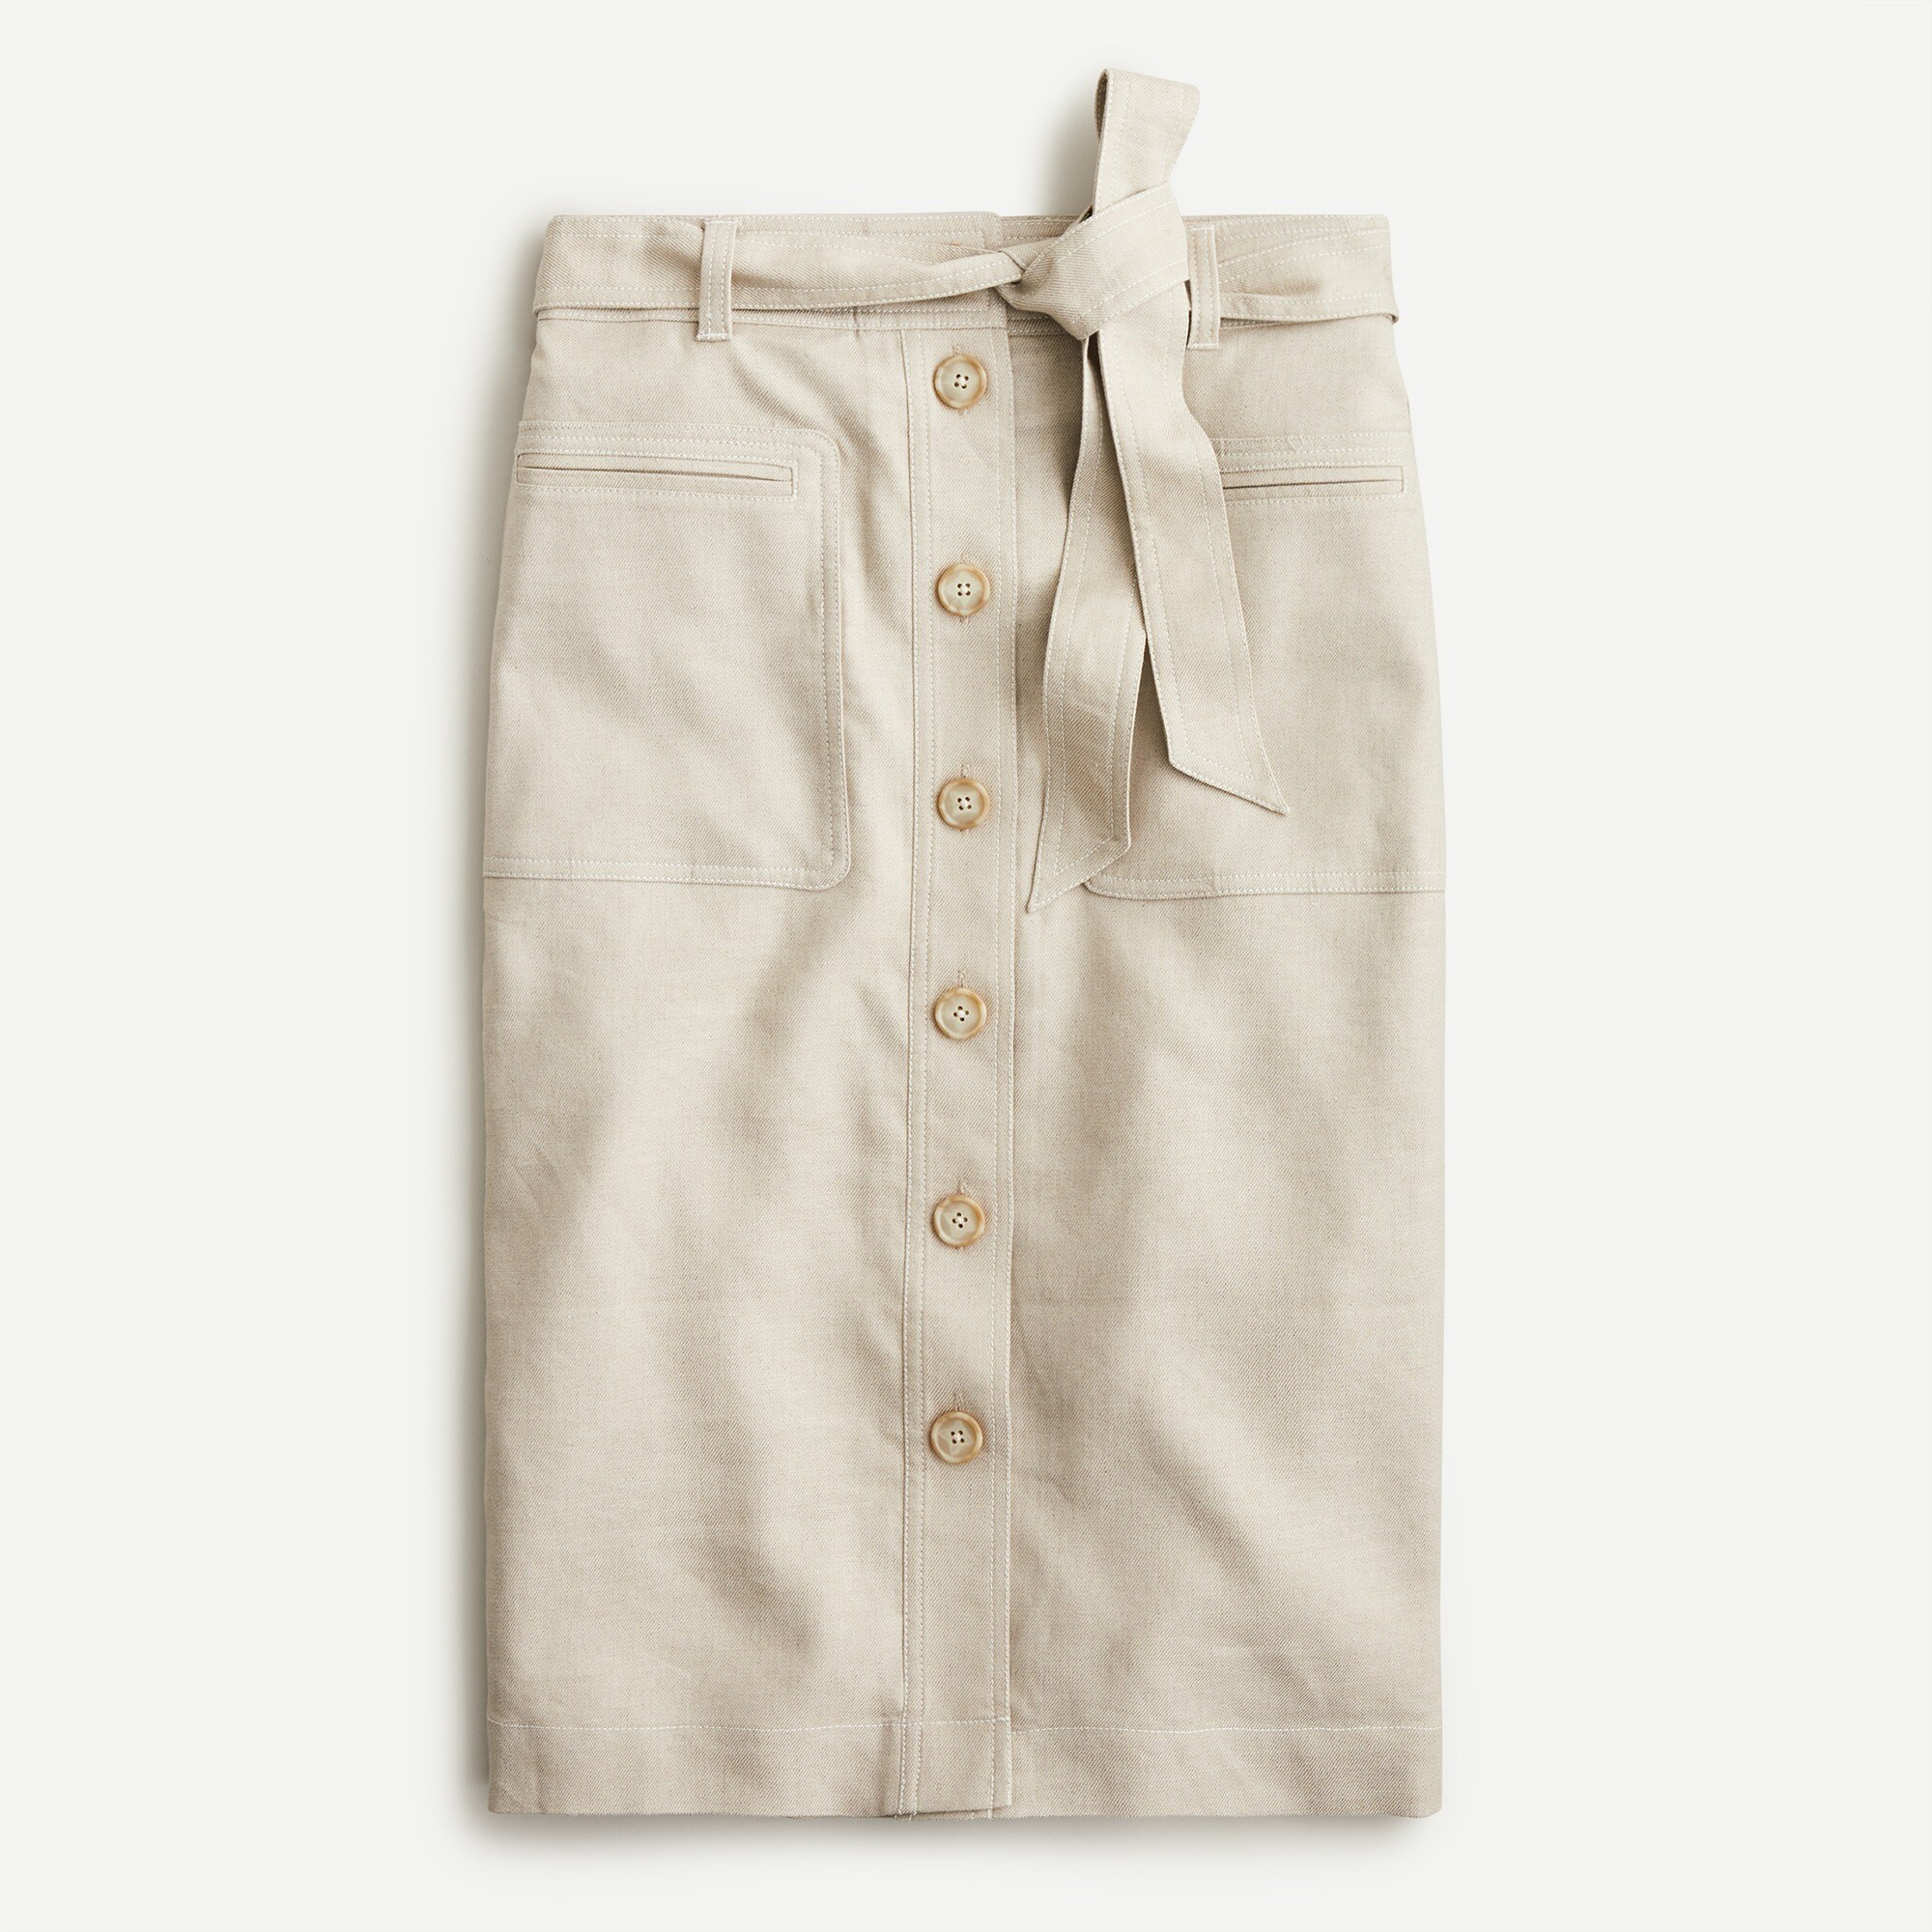  Button-front skirt in stretch linen